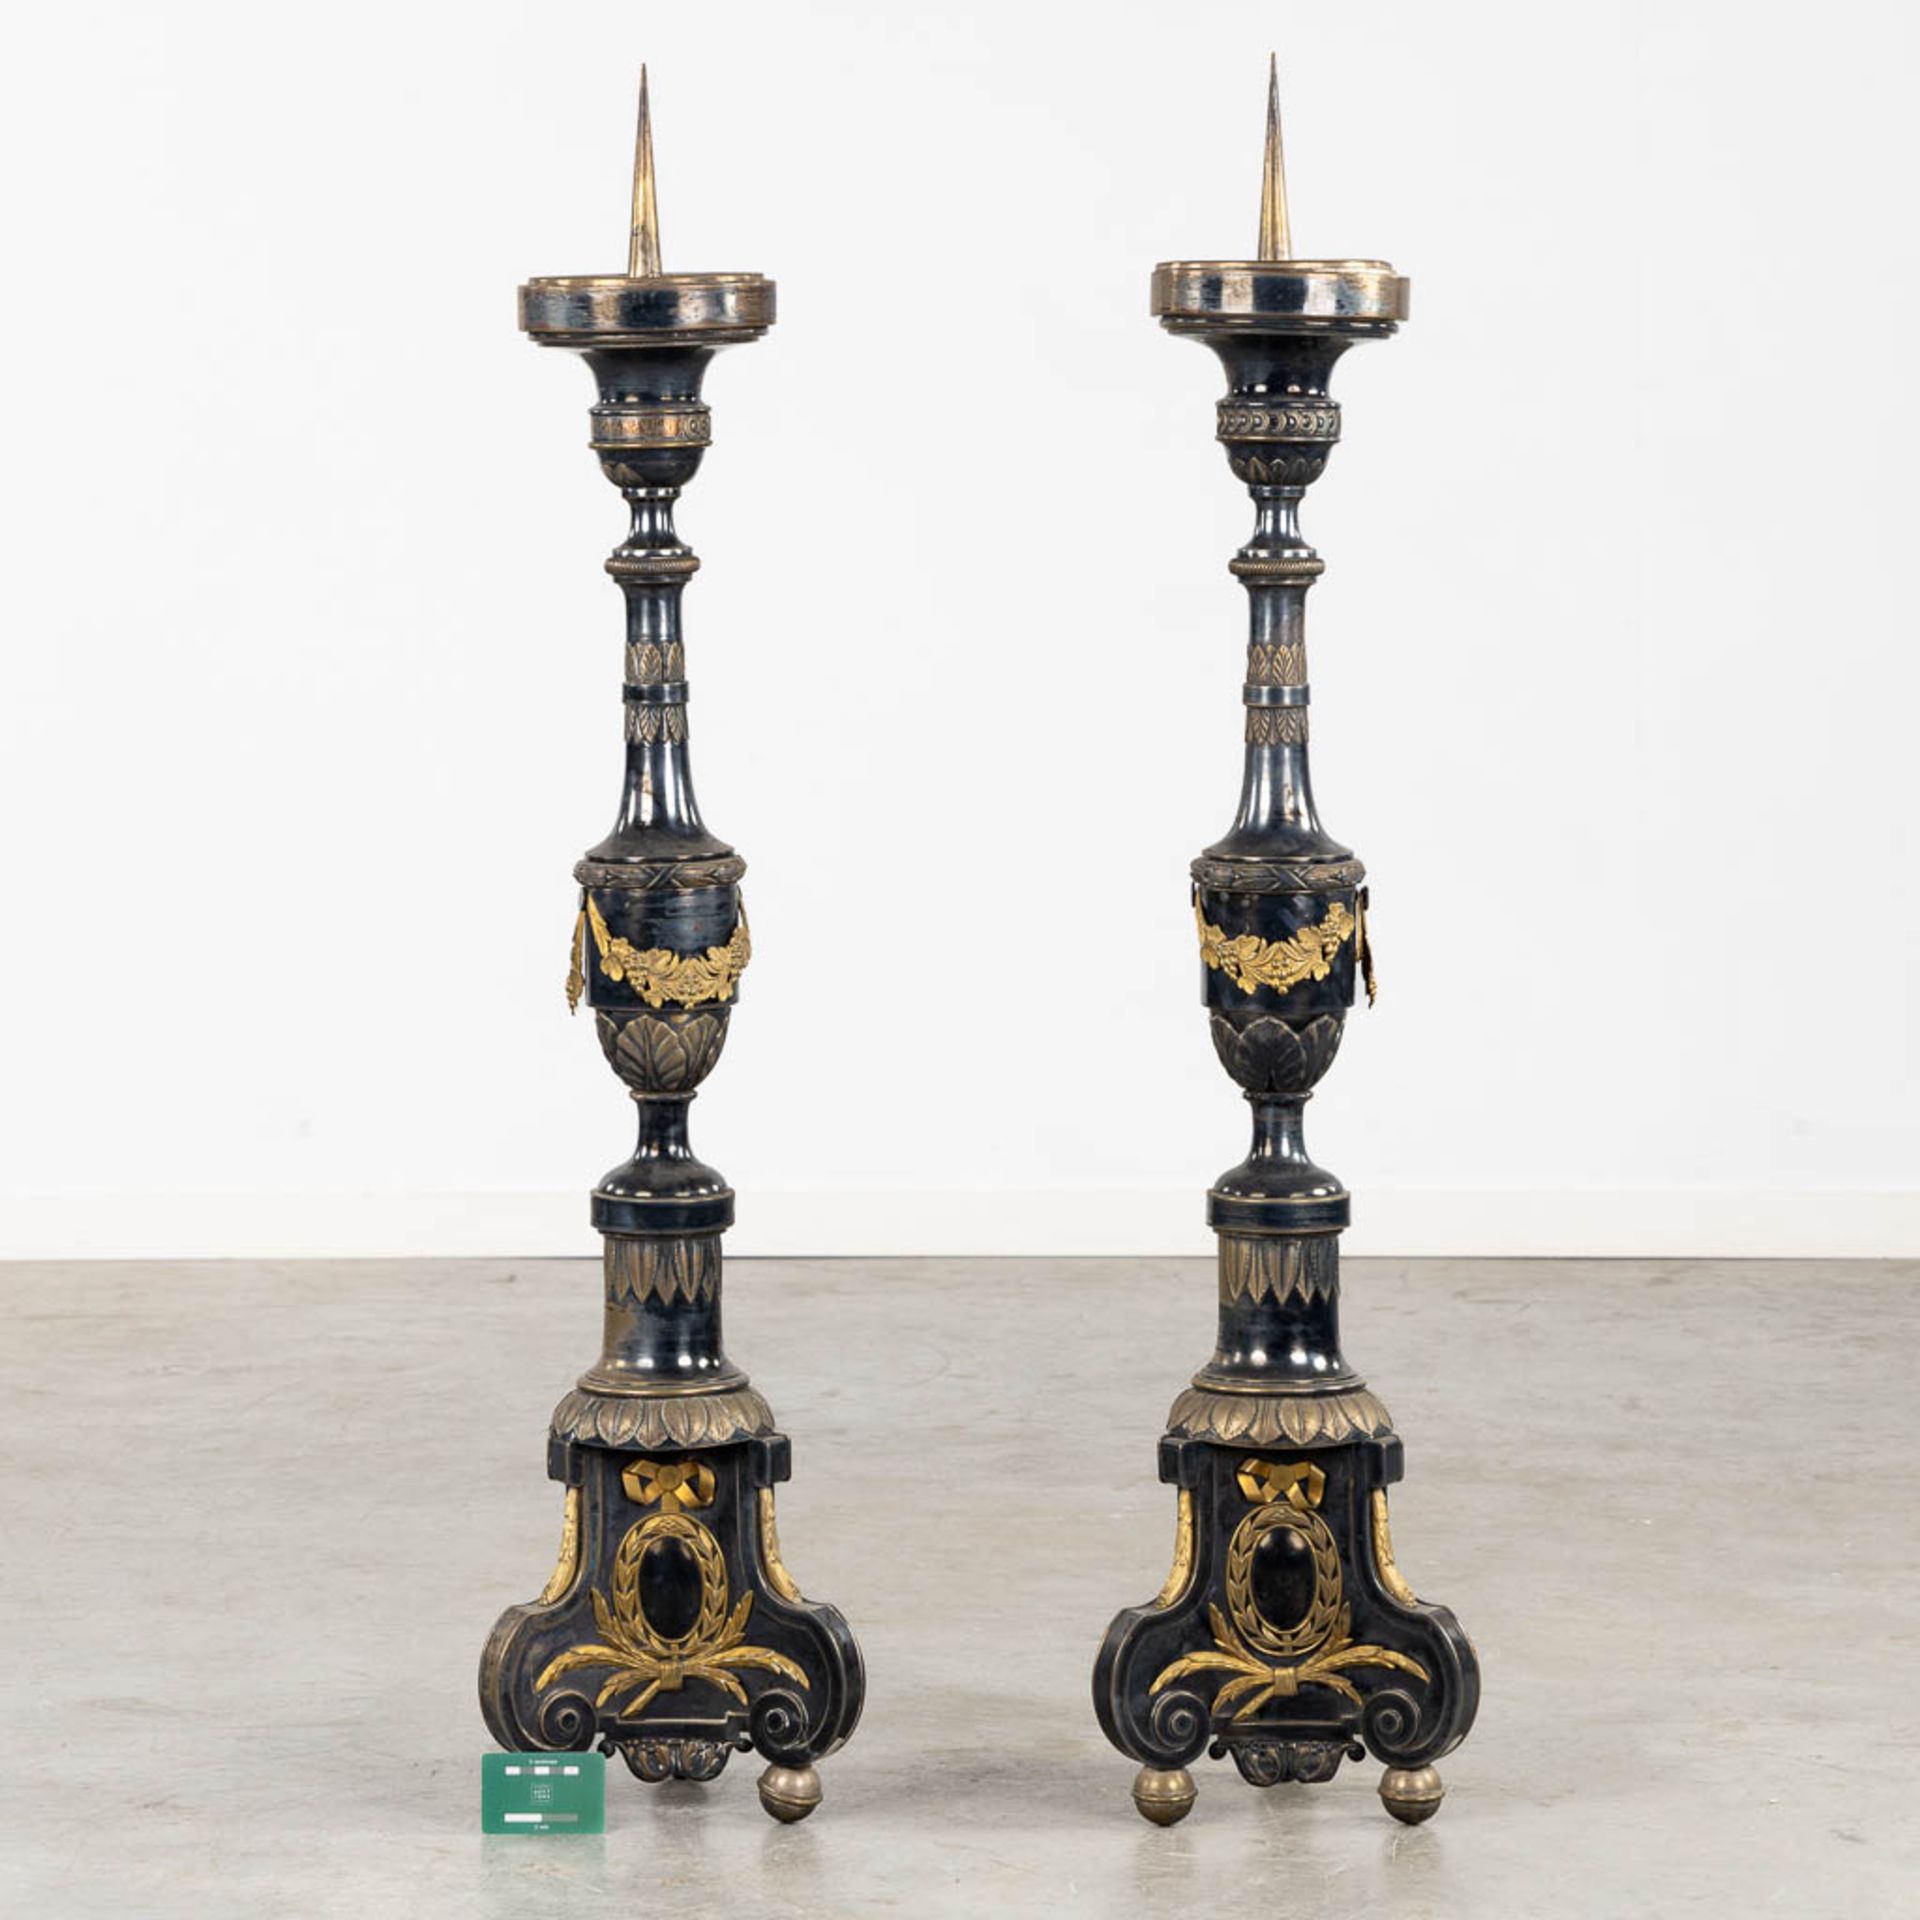 A pair of Church Candlesticks, silver- and gold-plated metal. 19th C. (H:120 cm) - Bild 2 aus 9